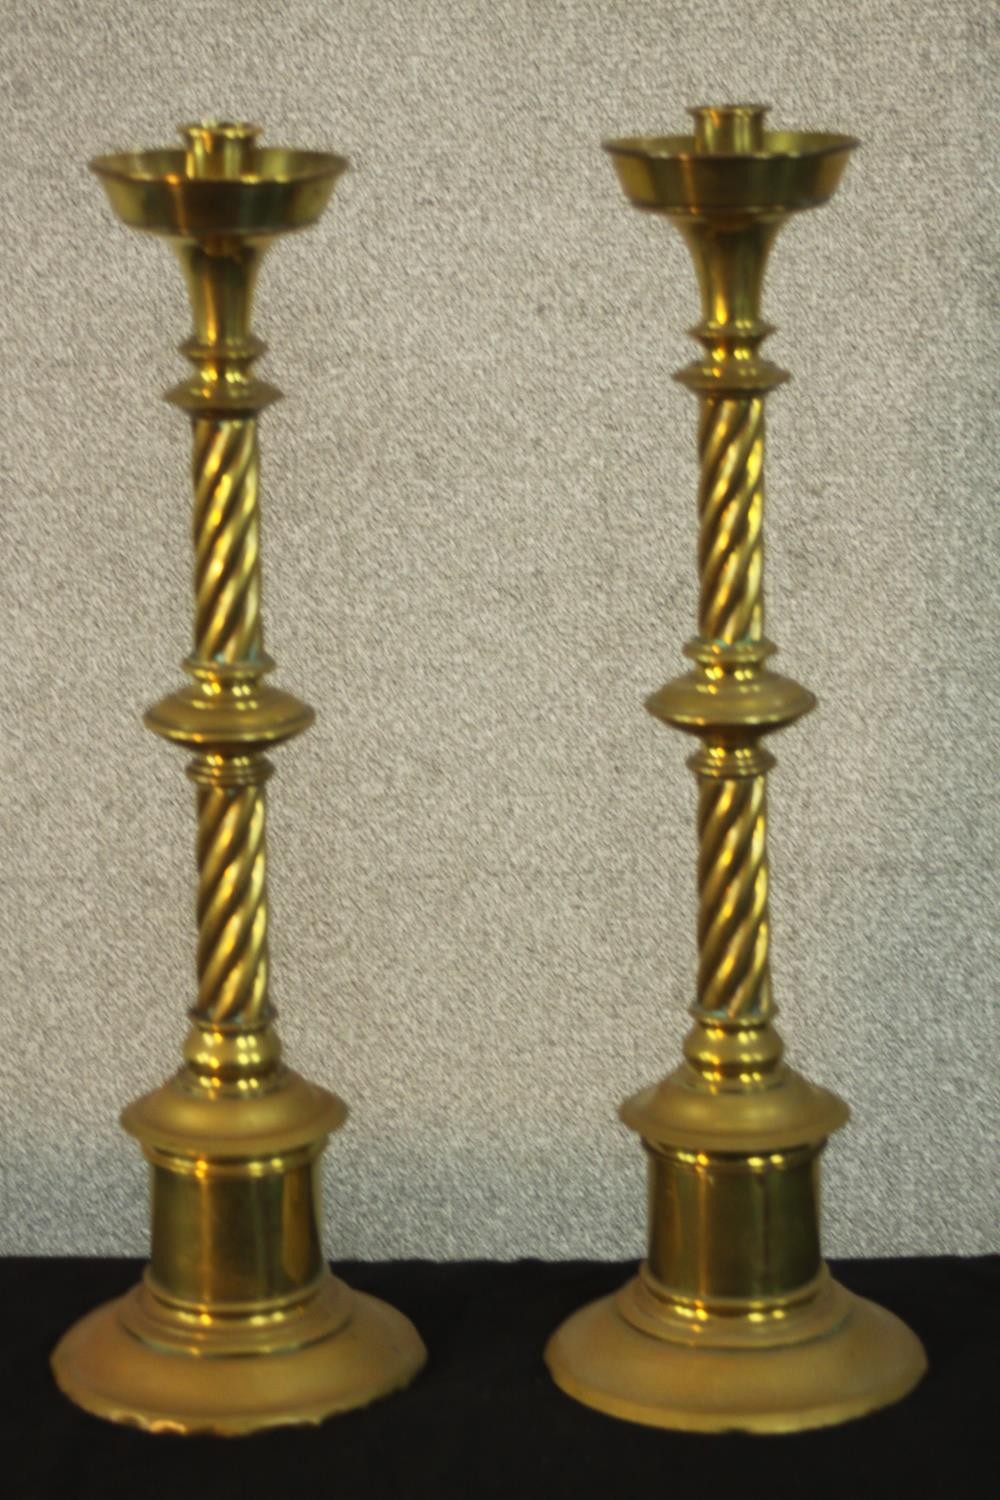 A pair of large early 20th century brass ecclesiastical twist stem floor standing candle holders